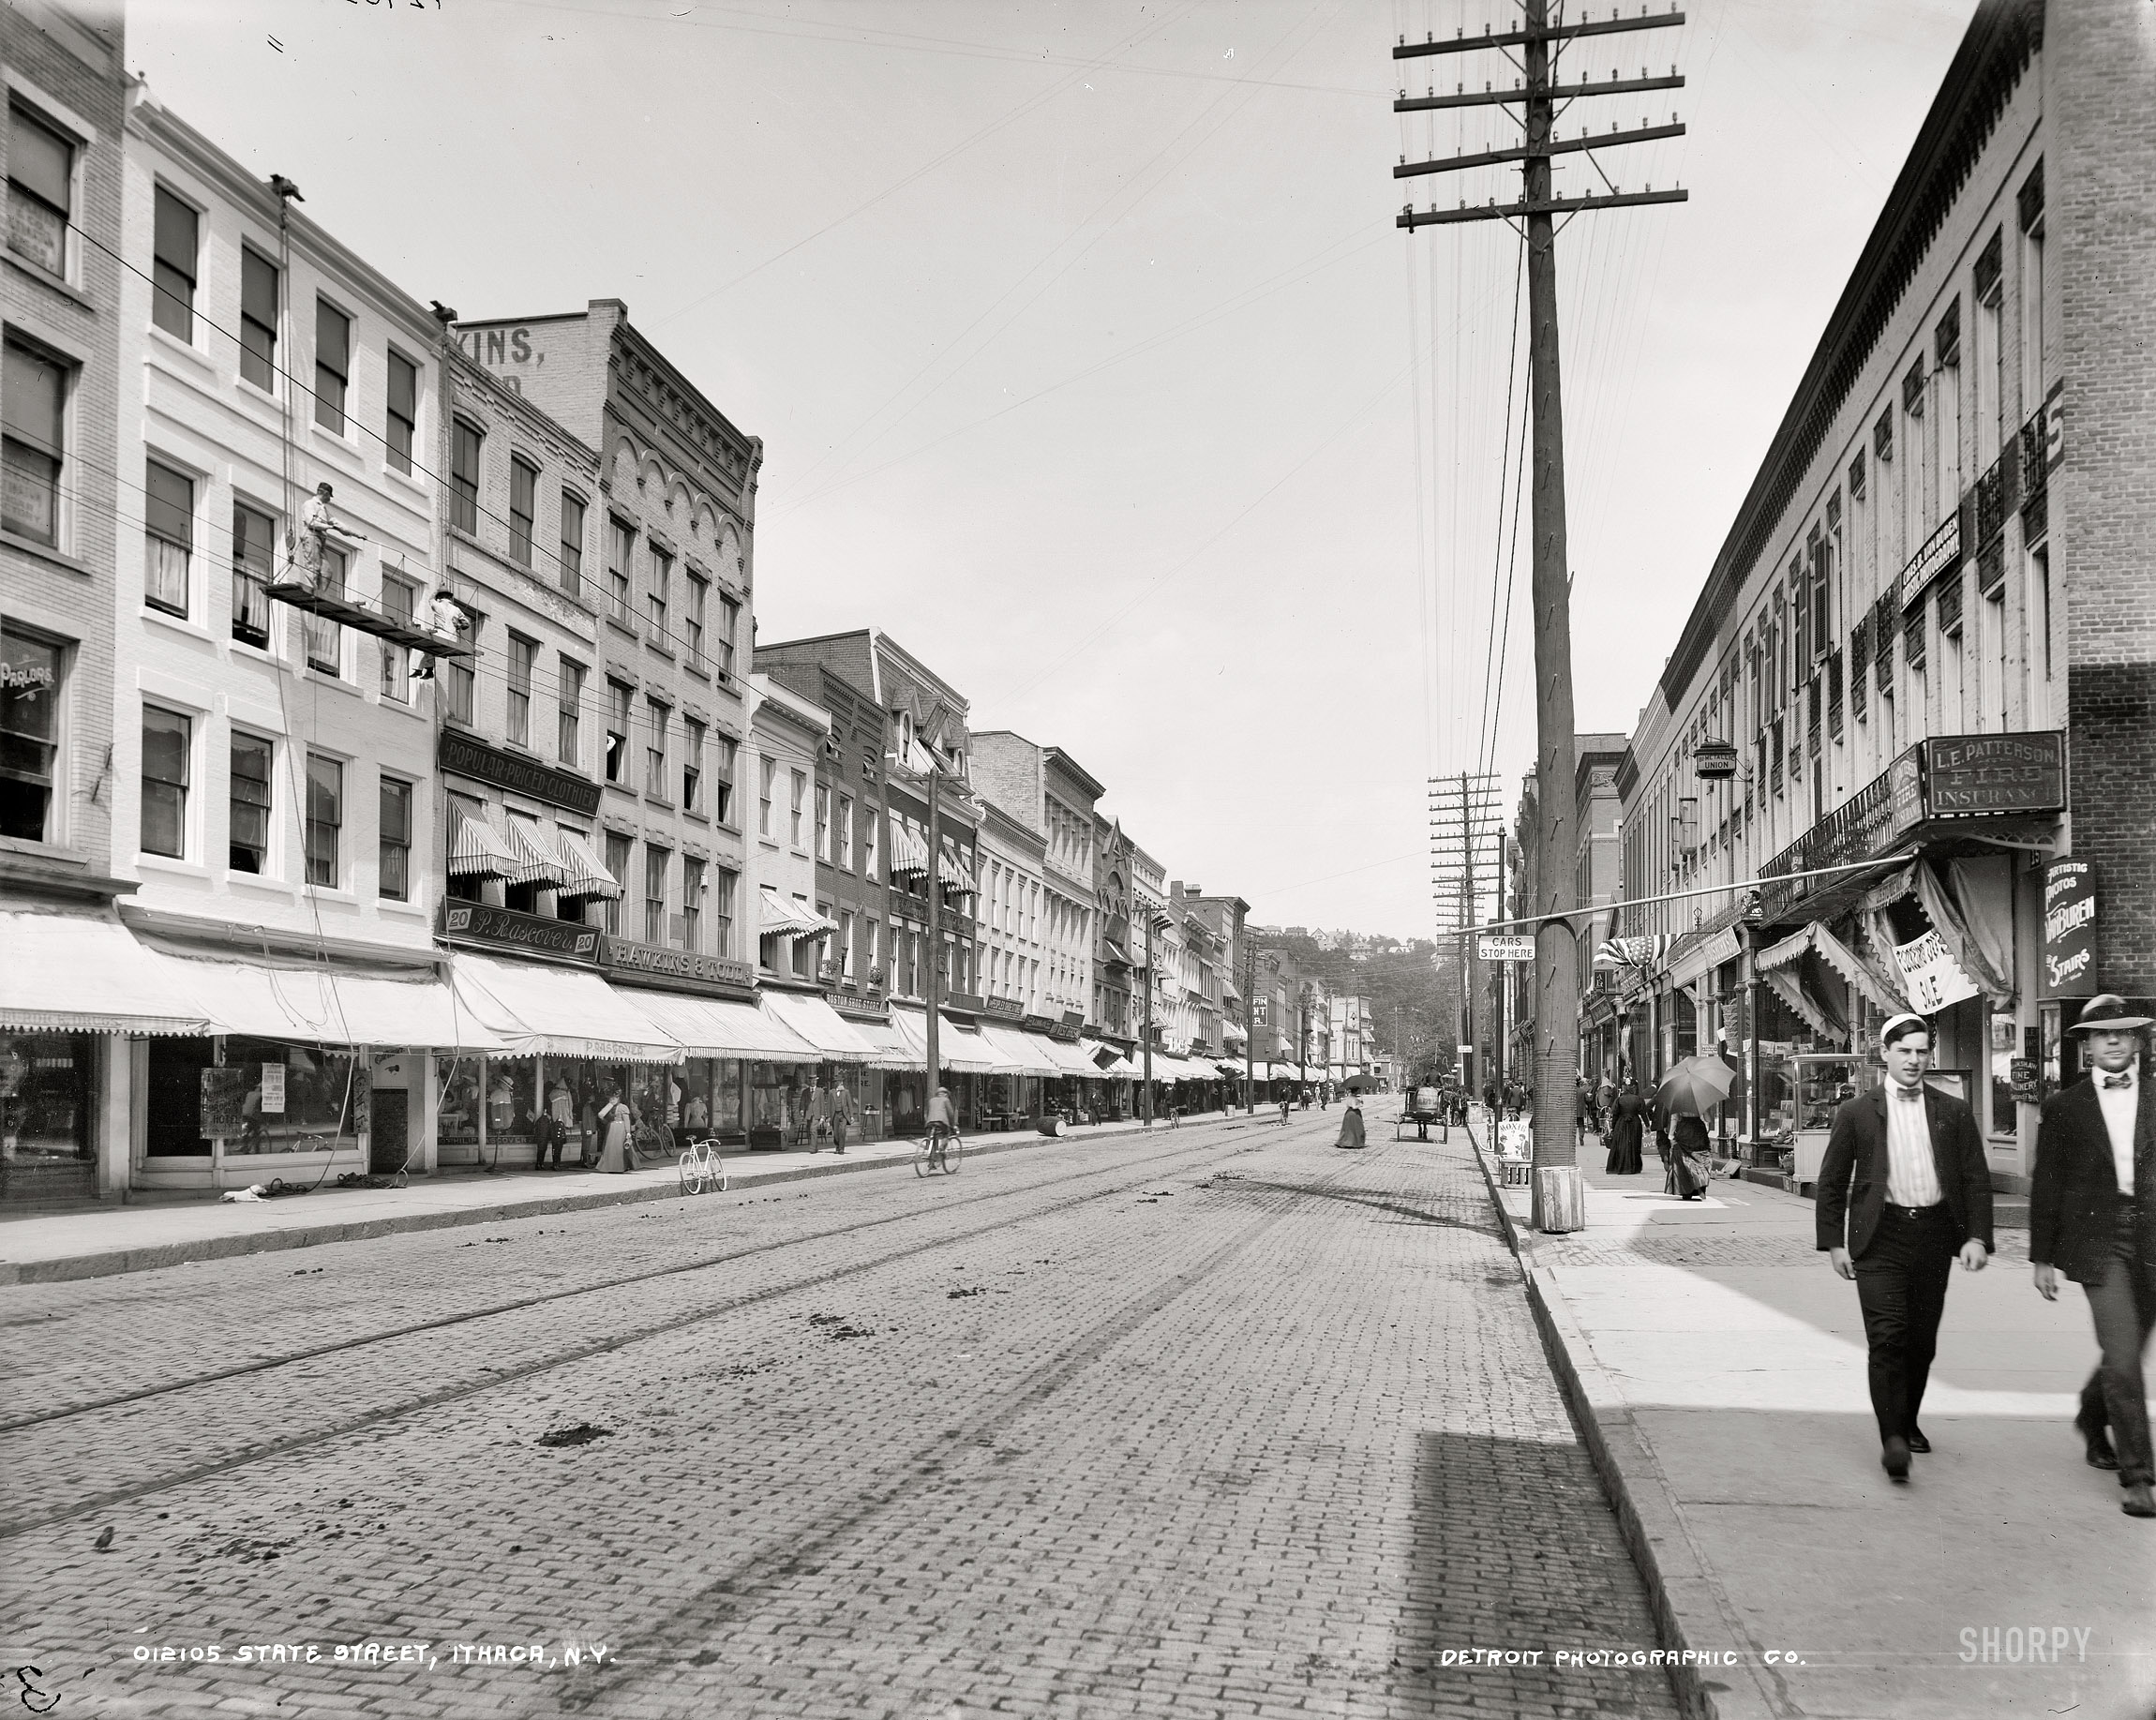 State Street in Ithaca, N.Y., circa 1901. Detroit Publishing Co. View full size.